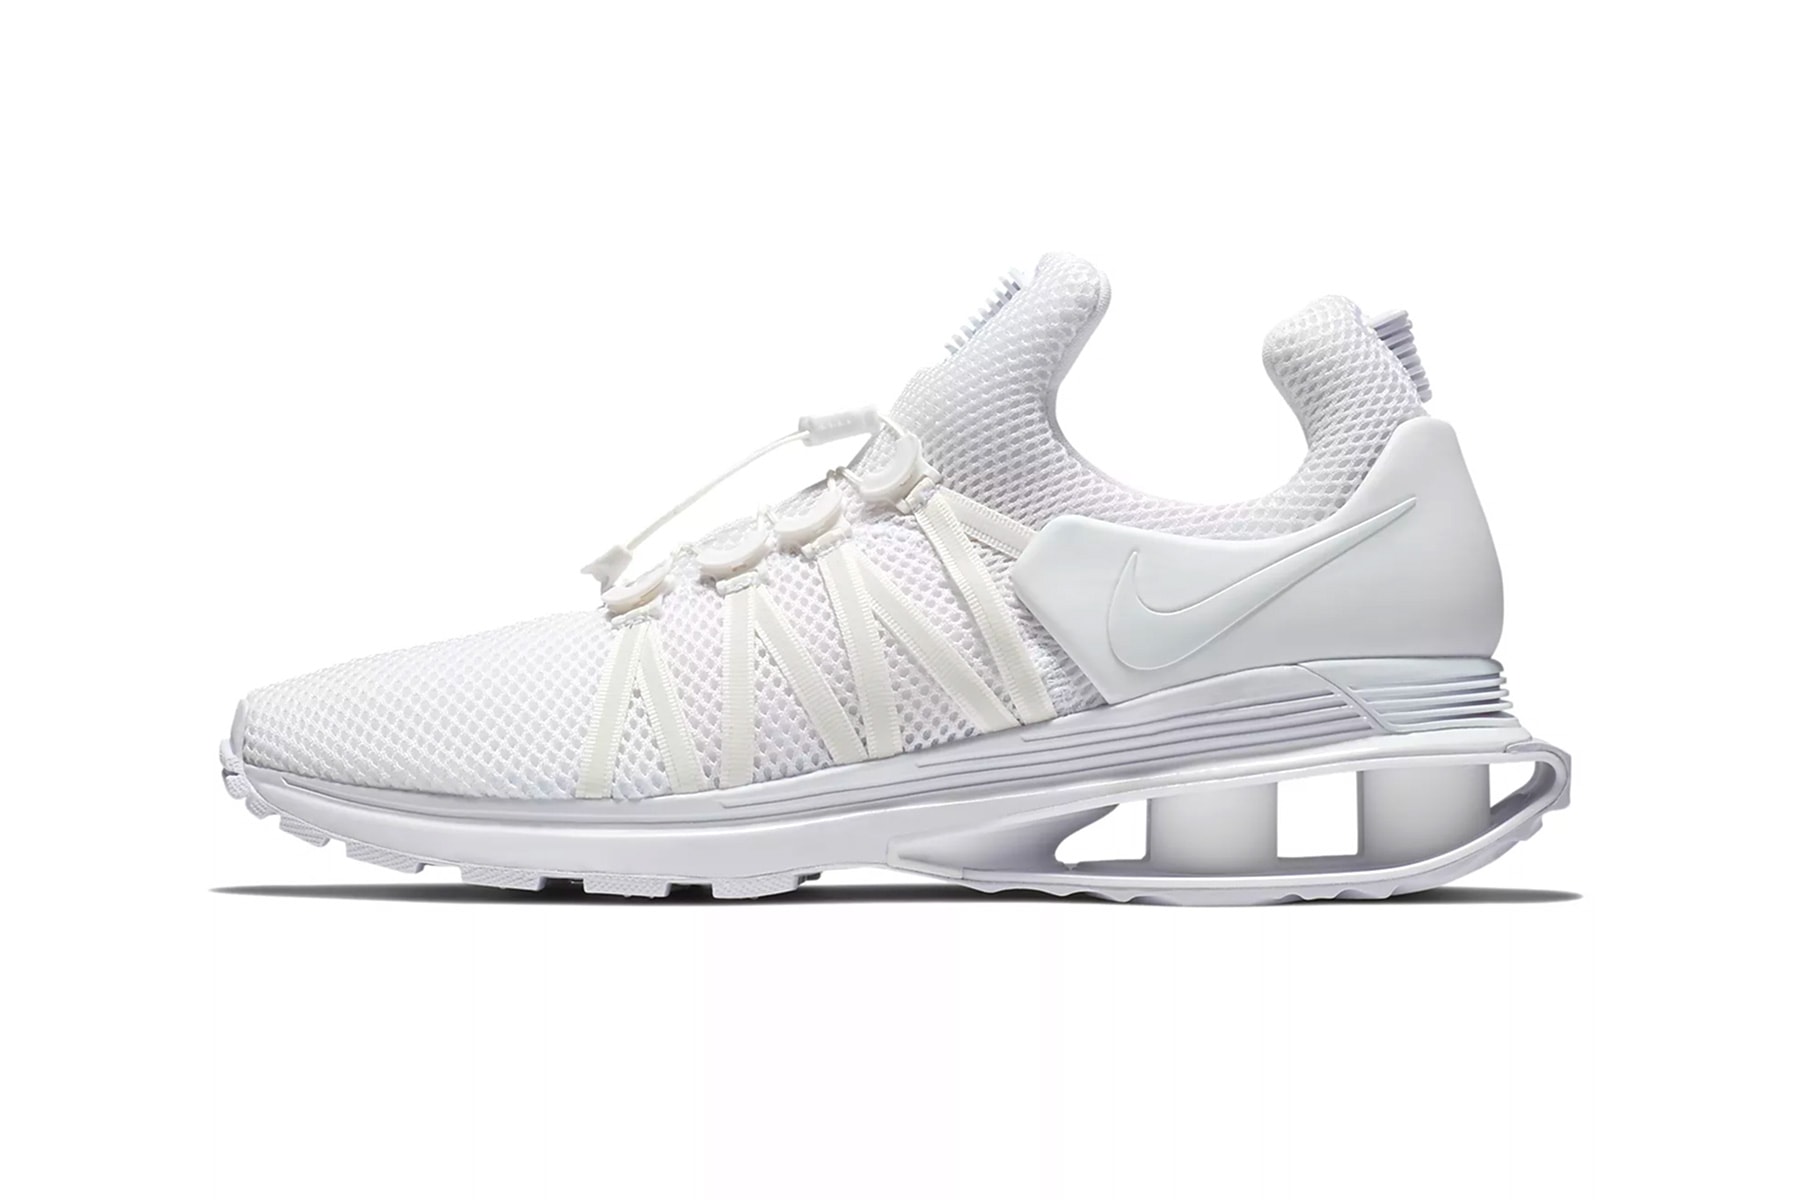 Nike Shox Gravity New Colorways Release date summer 2018 sneaker all black all white